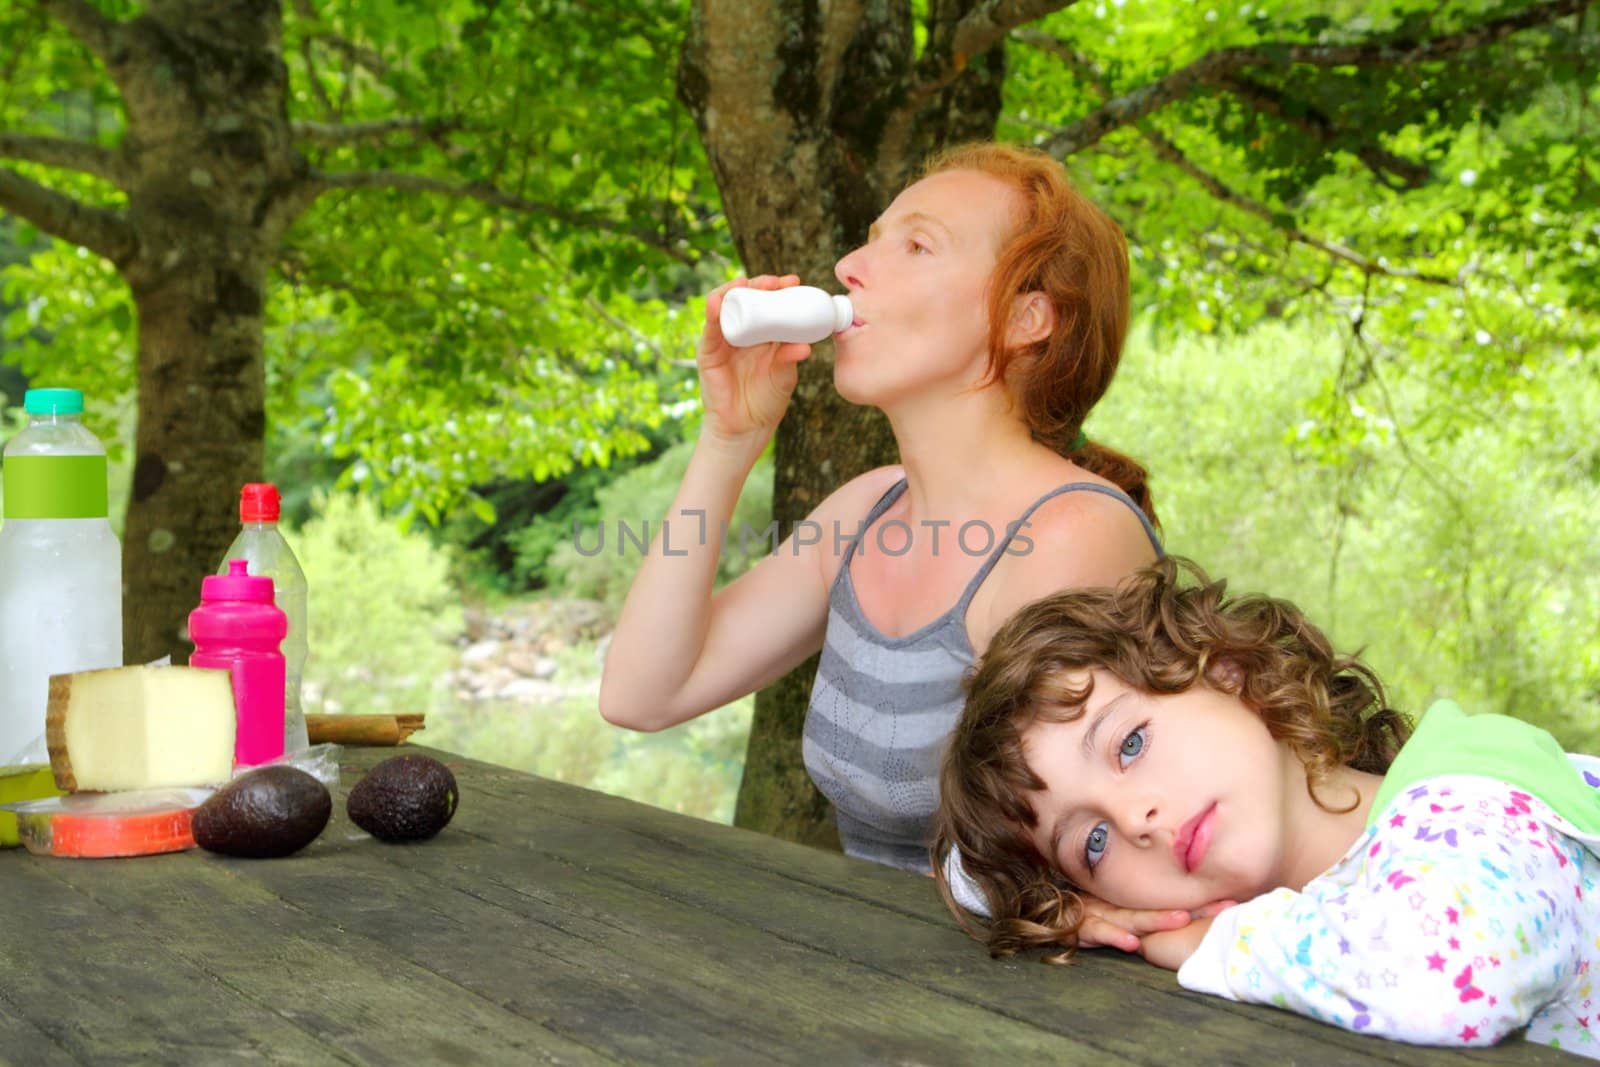 Mother daughter picnic outdoor park relaxed girl